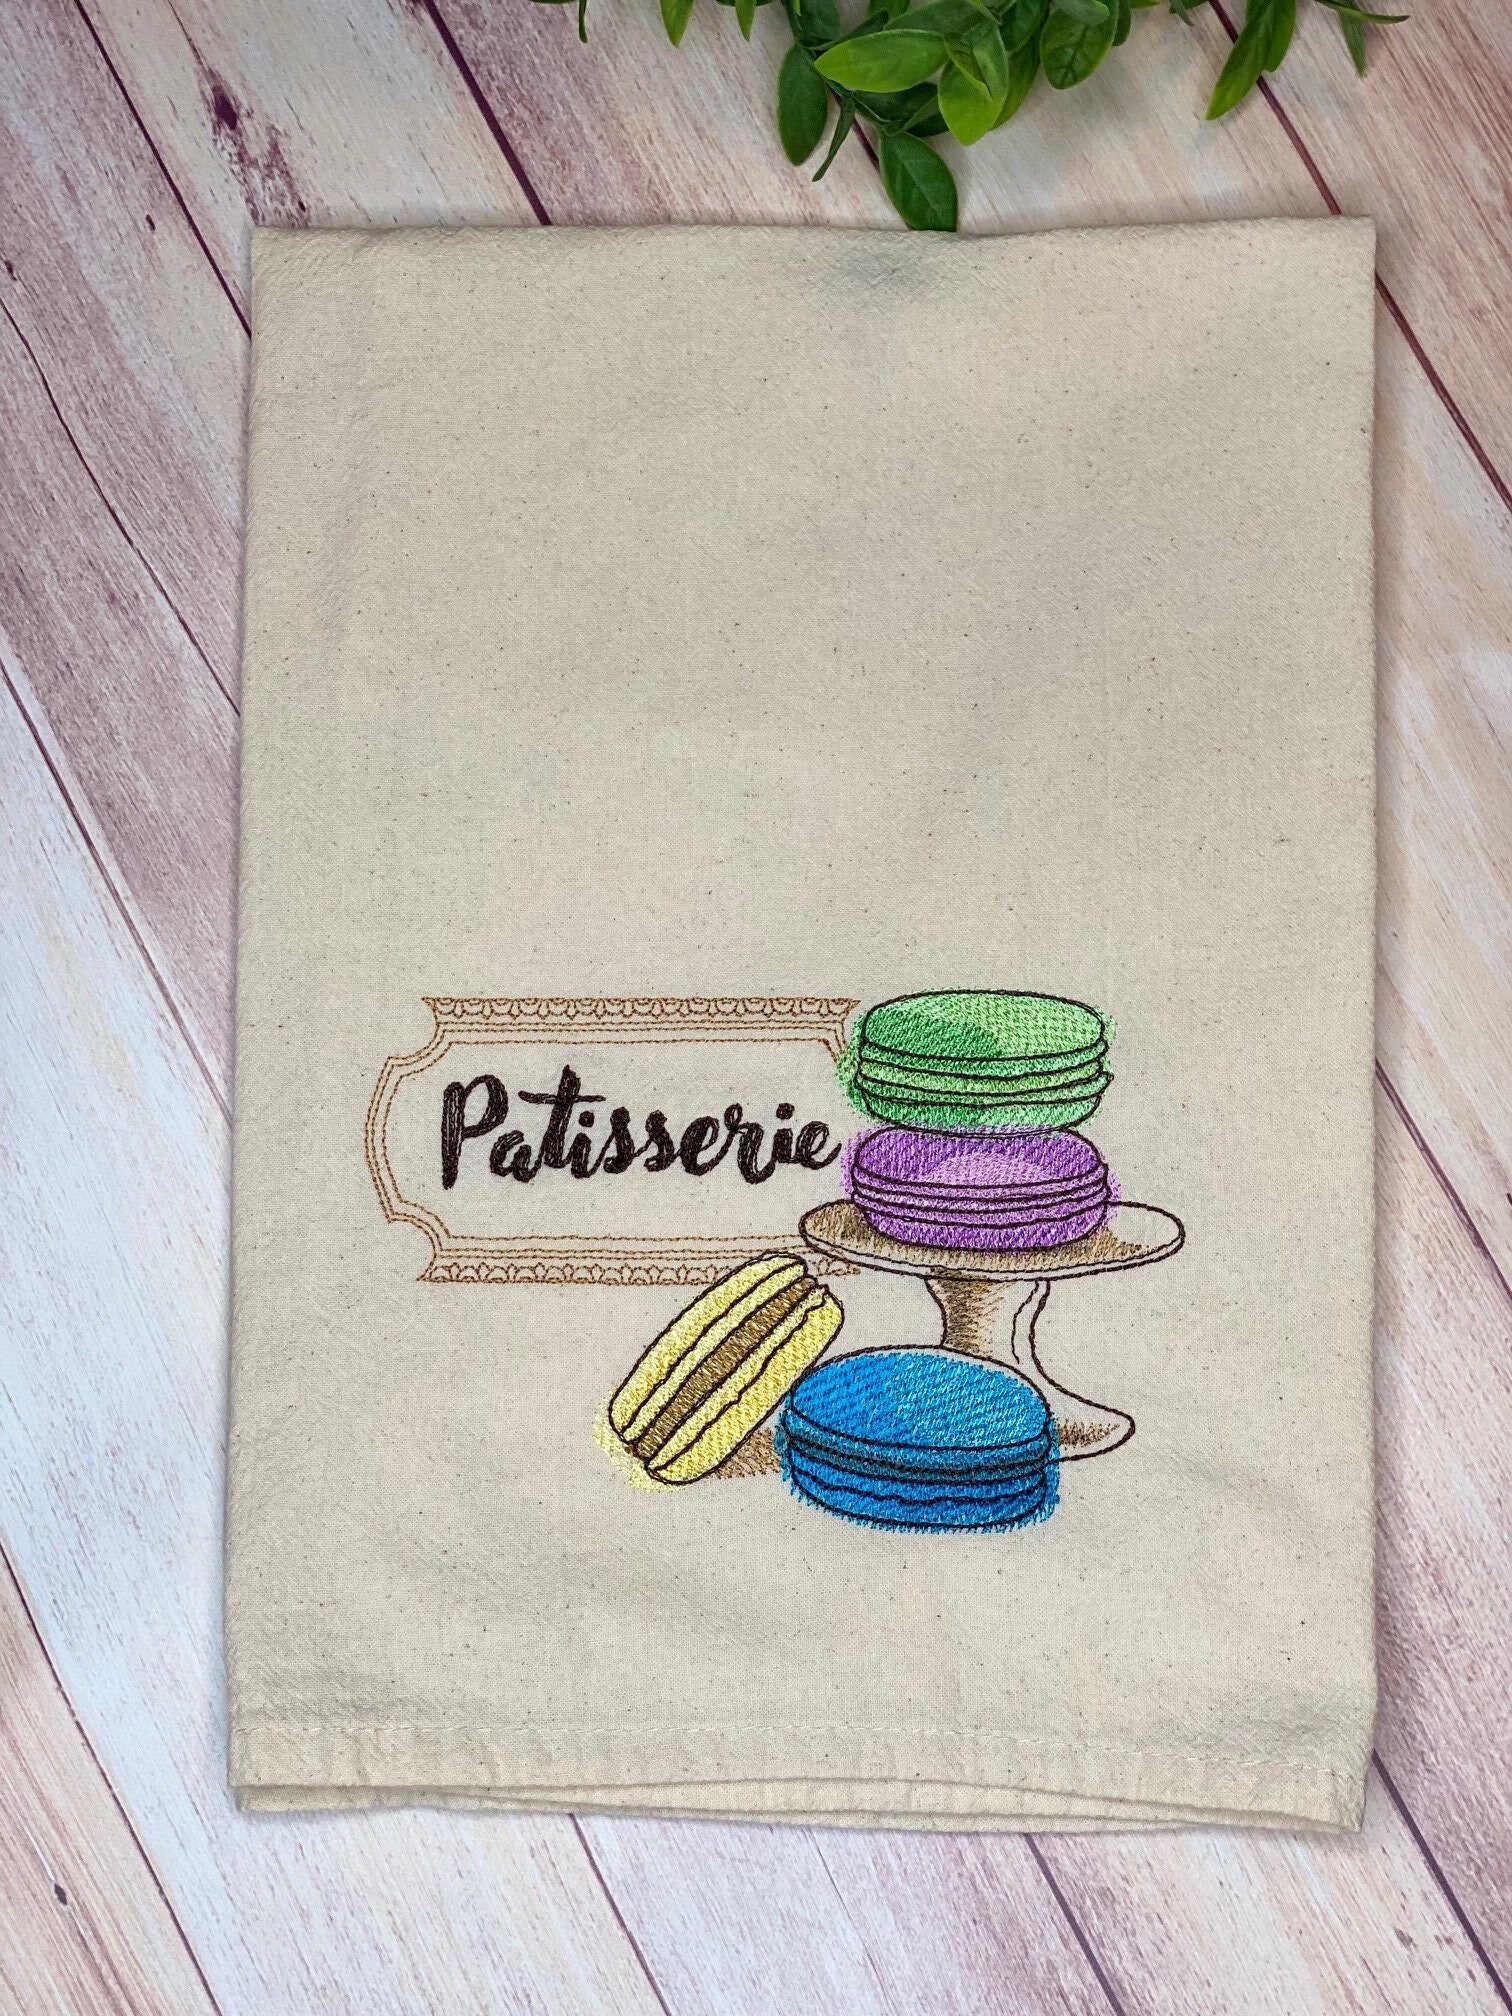 PARIS CAFE French Cotton Woven Kitchen Towels - Exclusive French Designs Dish  Towels - Elegant 100% Heavy Absorbent Cotton Tea Towels - Kitchen BBQ Area  Camping RV Hand Towels - France Paris